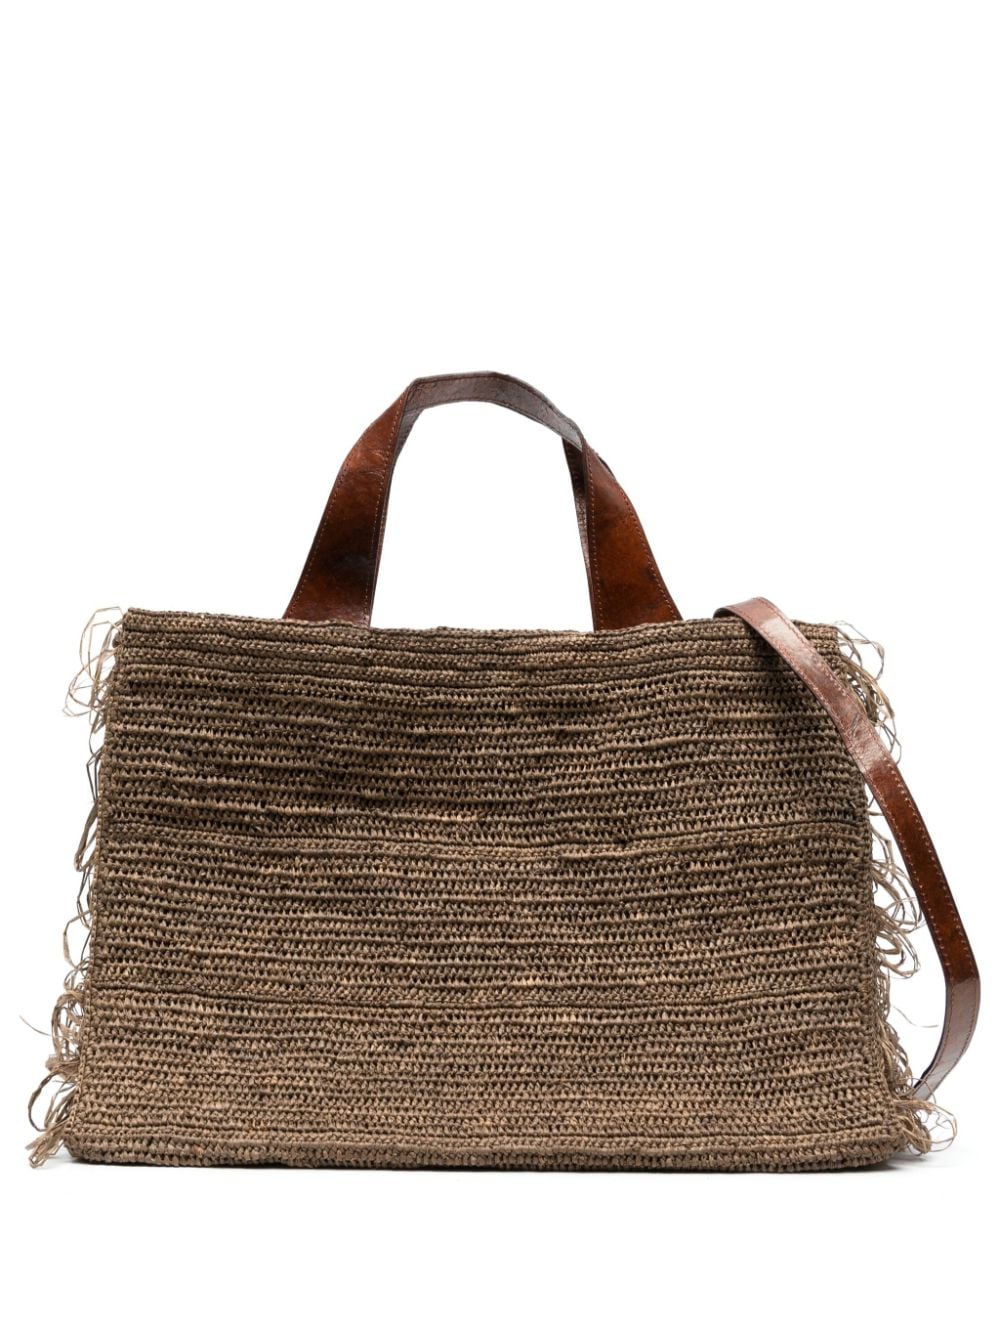 Onja woven fringed tote bag